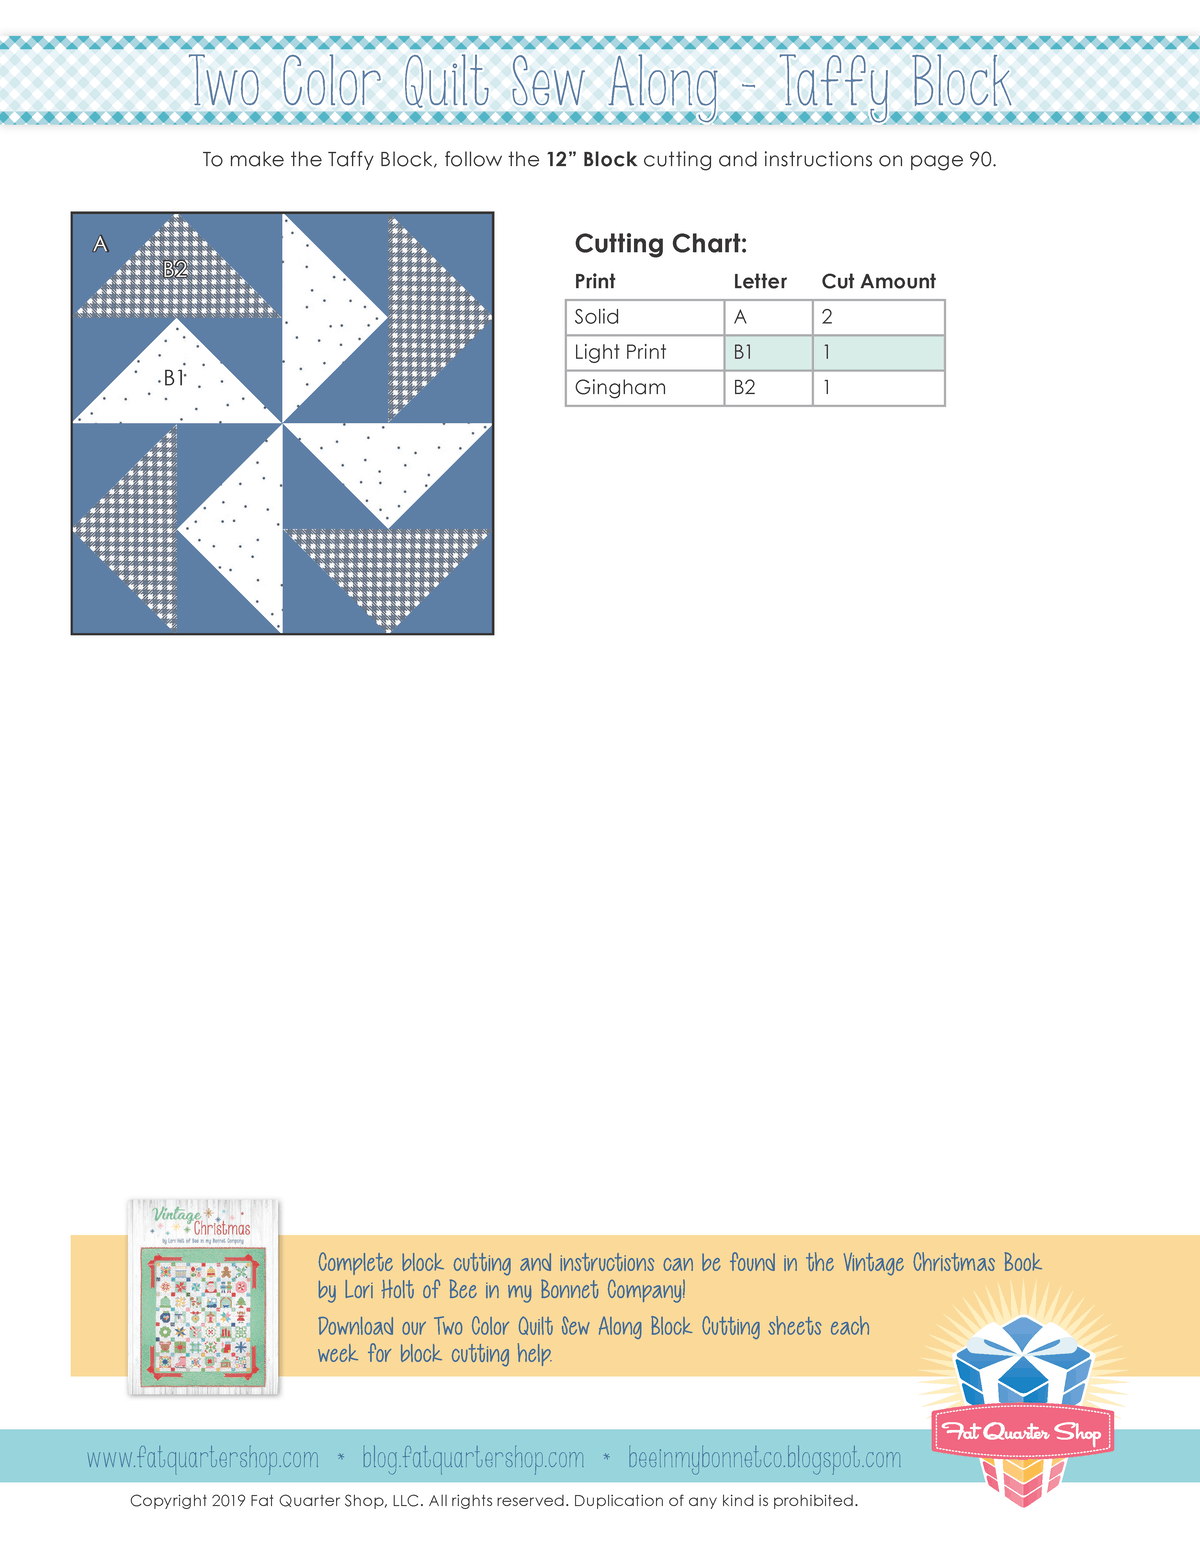 click to download taffy block cutting instructions